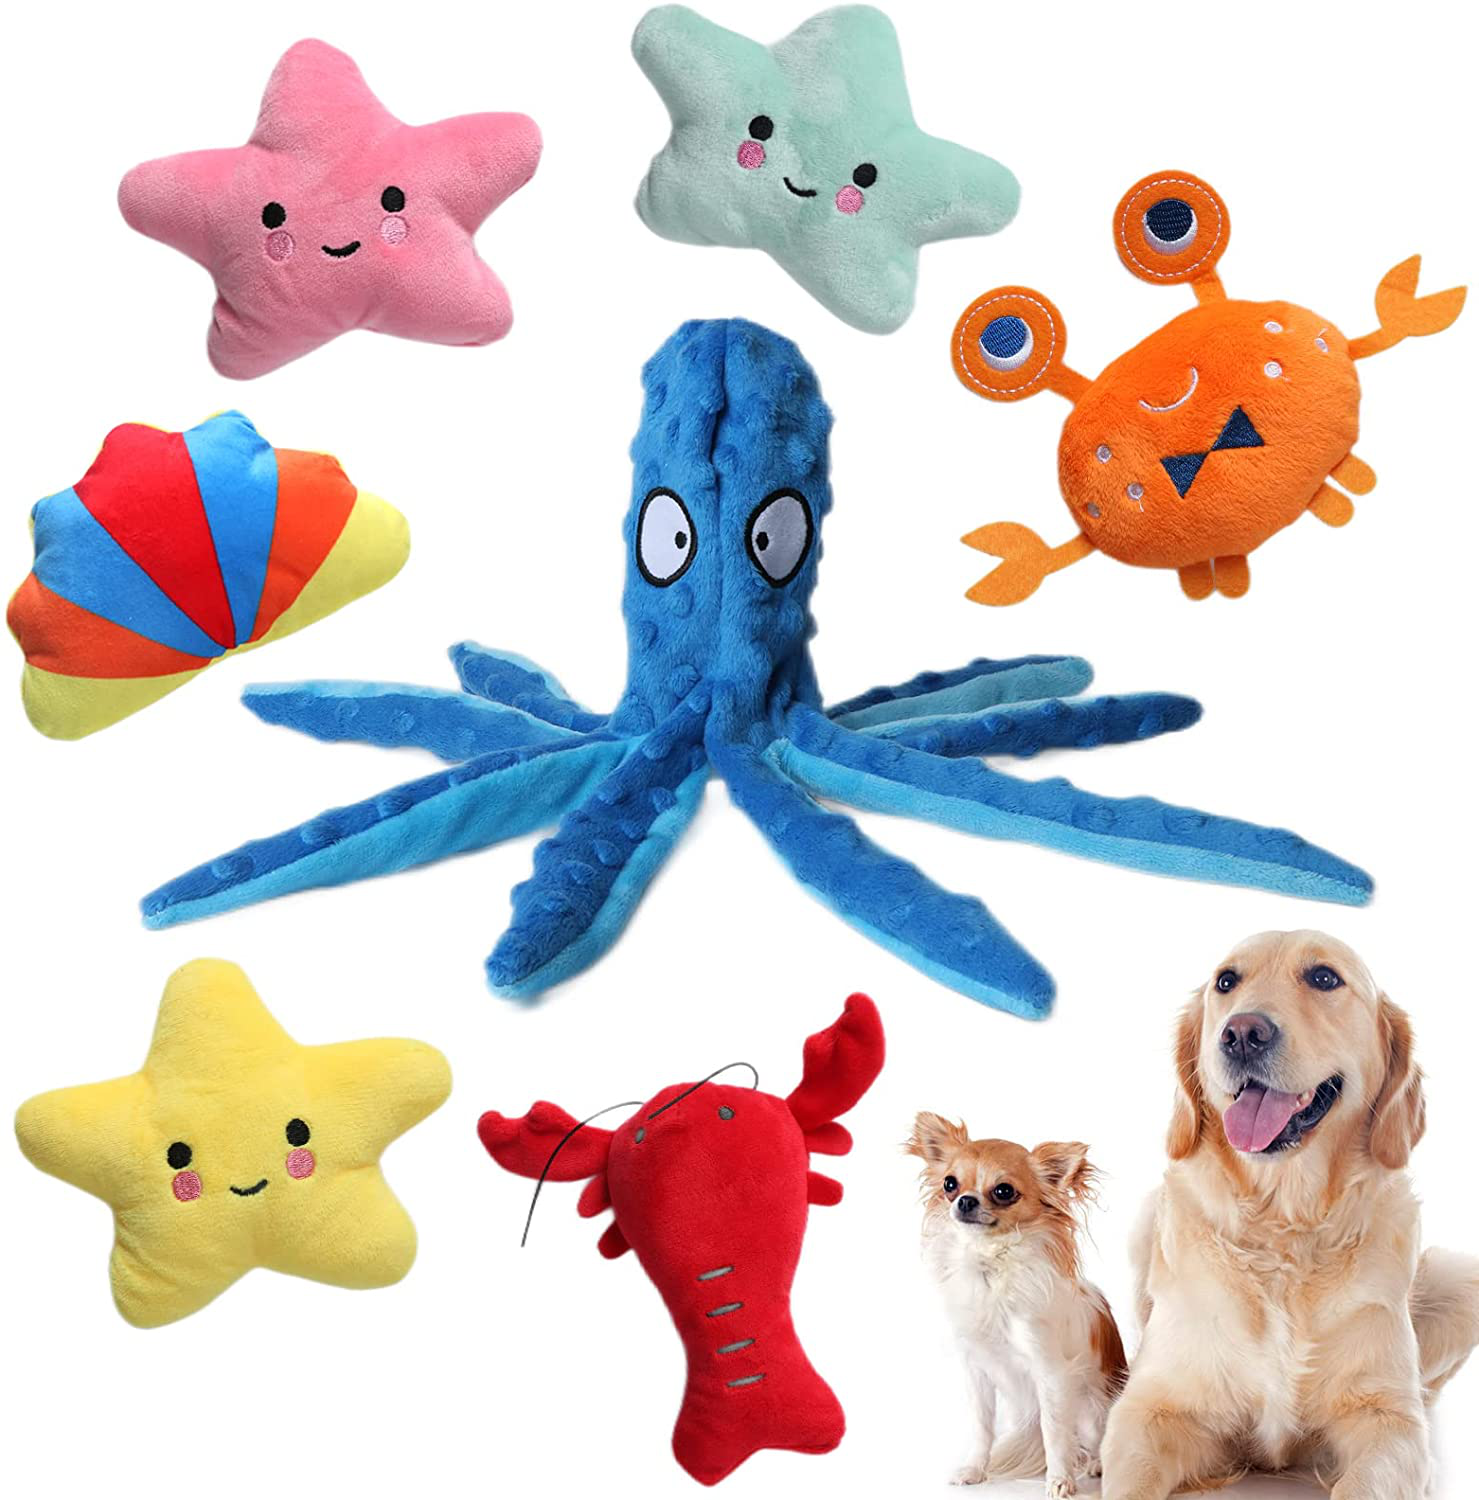 MJJYPET Dog Toys, Dog Chew Toys Teething Toys for Small Medium Puppy, No Stuffing and Stuffing Squeaky Toys,Rope Toys for Puppy Animals & Pet Supplies > Pet Supplies > Dog Supplies > Dog Toys M JJYPET 7Packs  